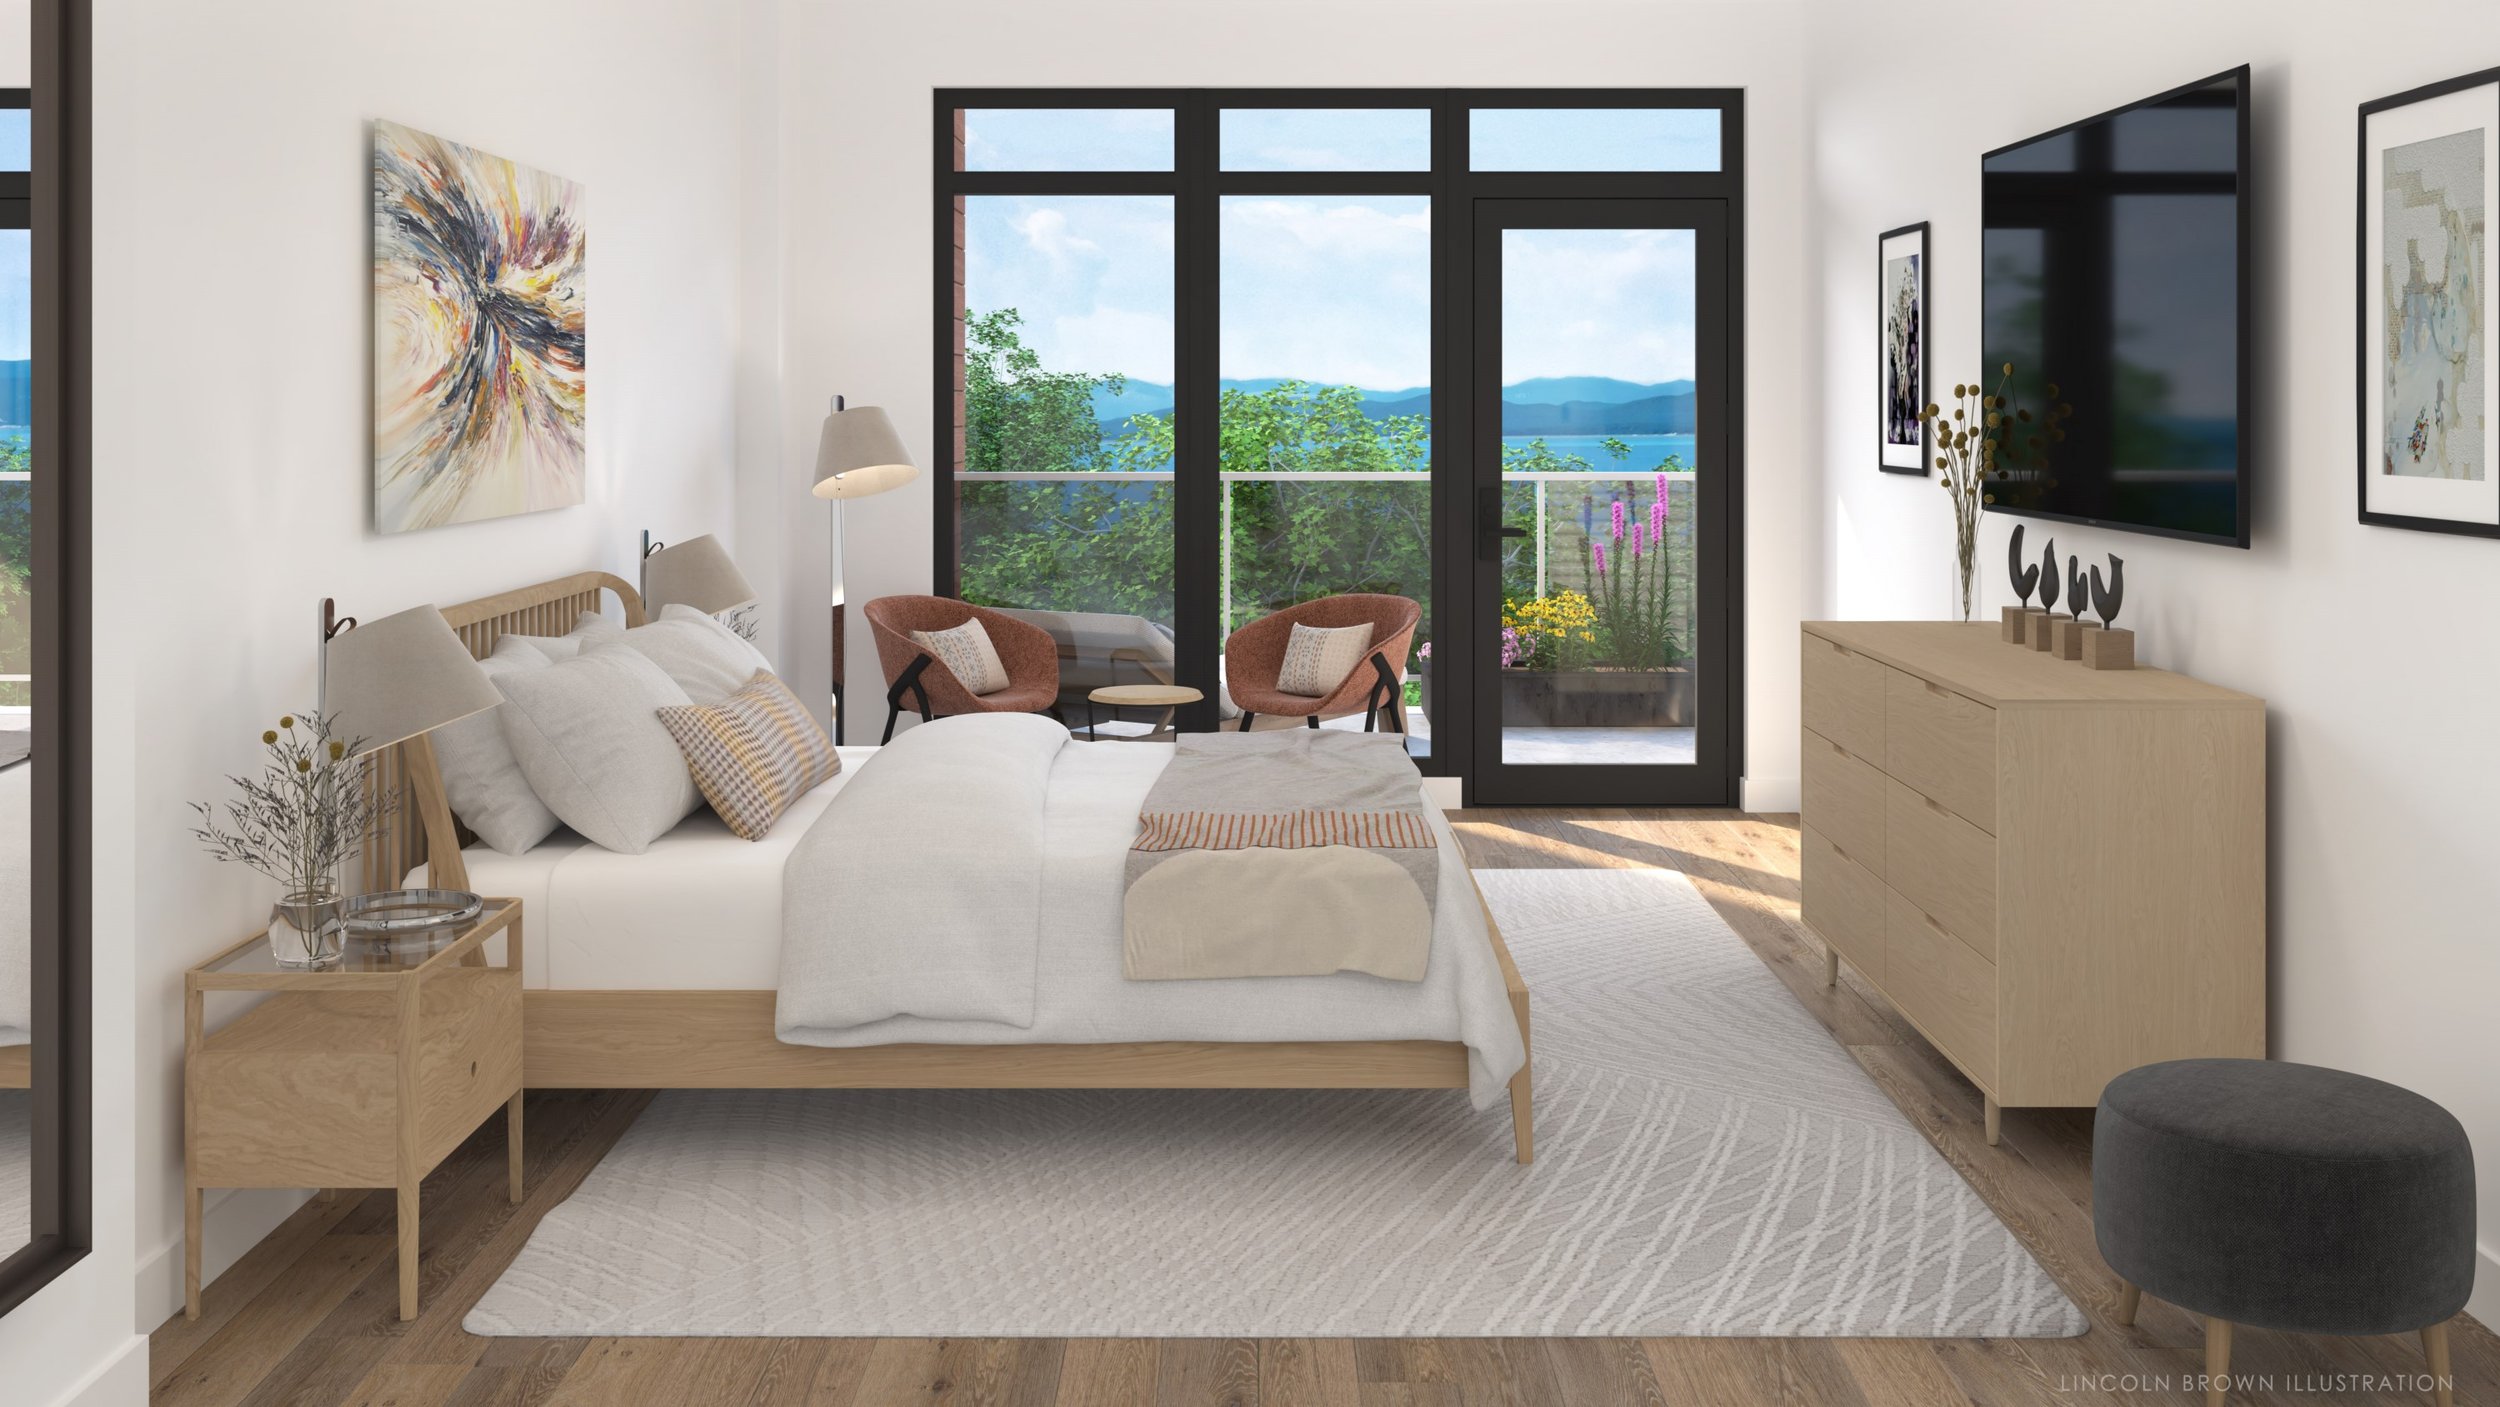 2023-30 Cambrian Rise_M 609 - Bedroom 1.jpg